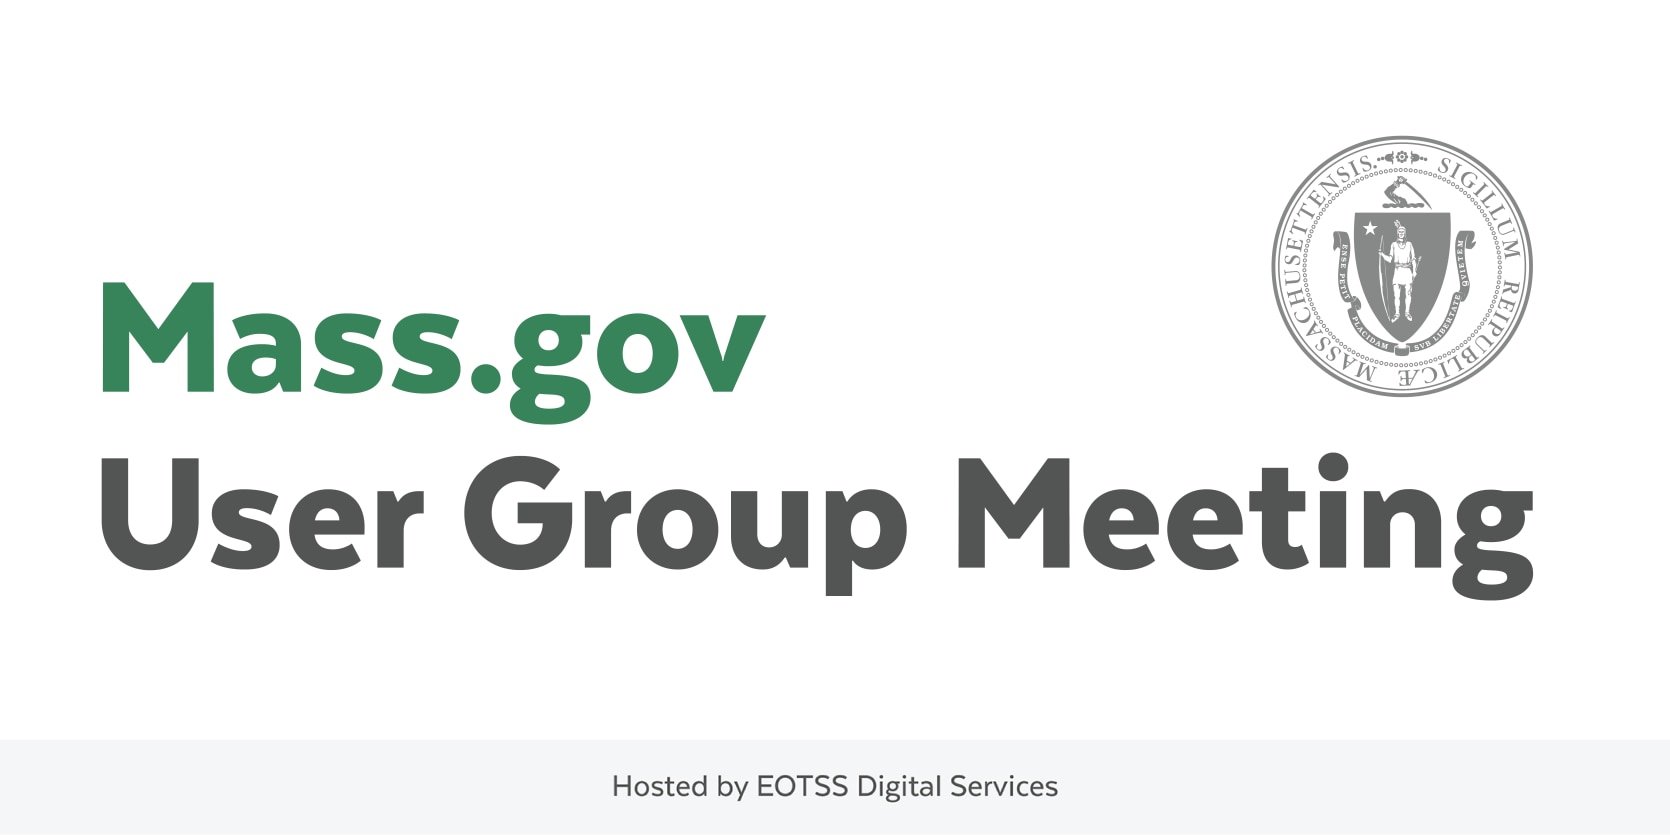 Mass.gov User Group Meeting with State Seal and hosted by Digital Services